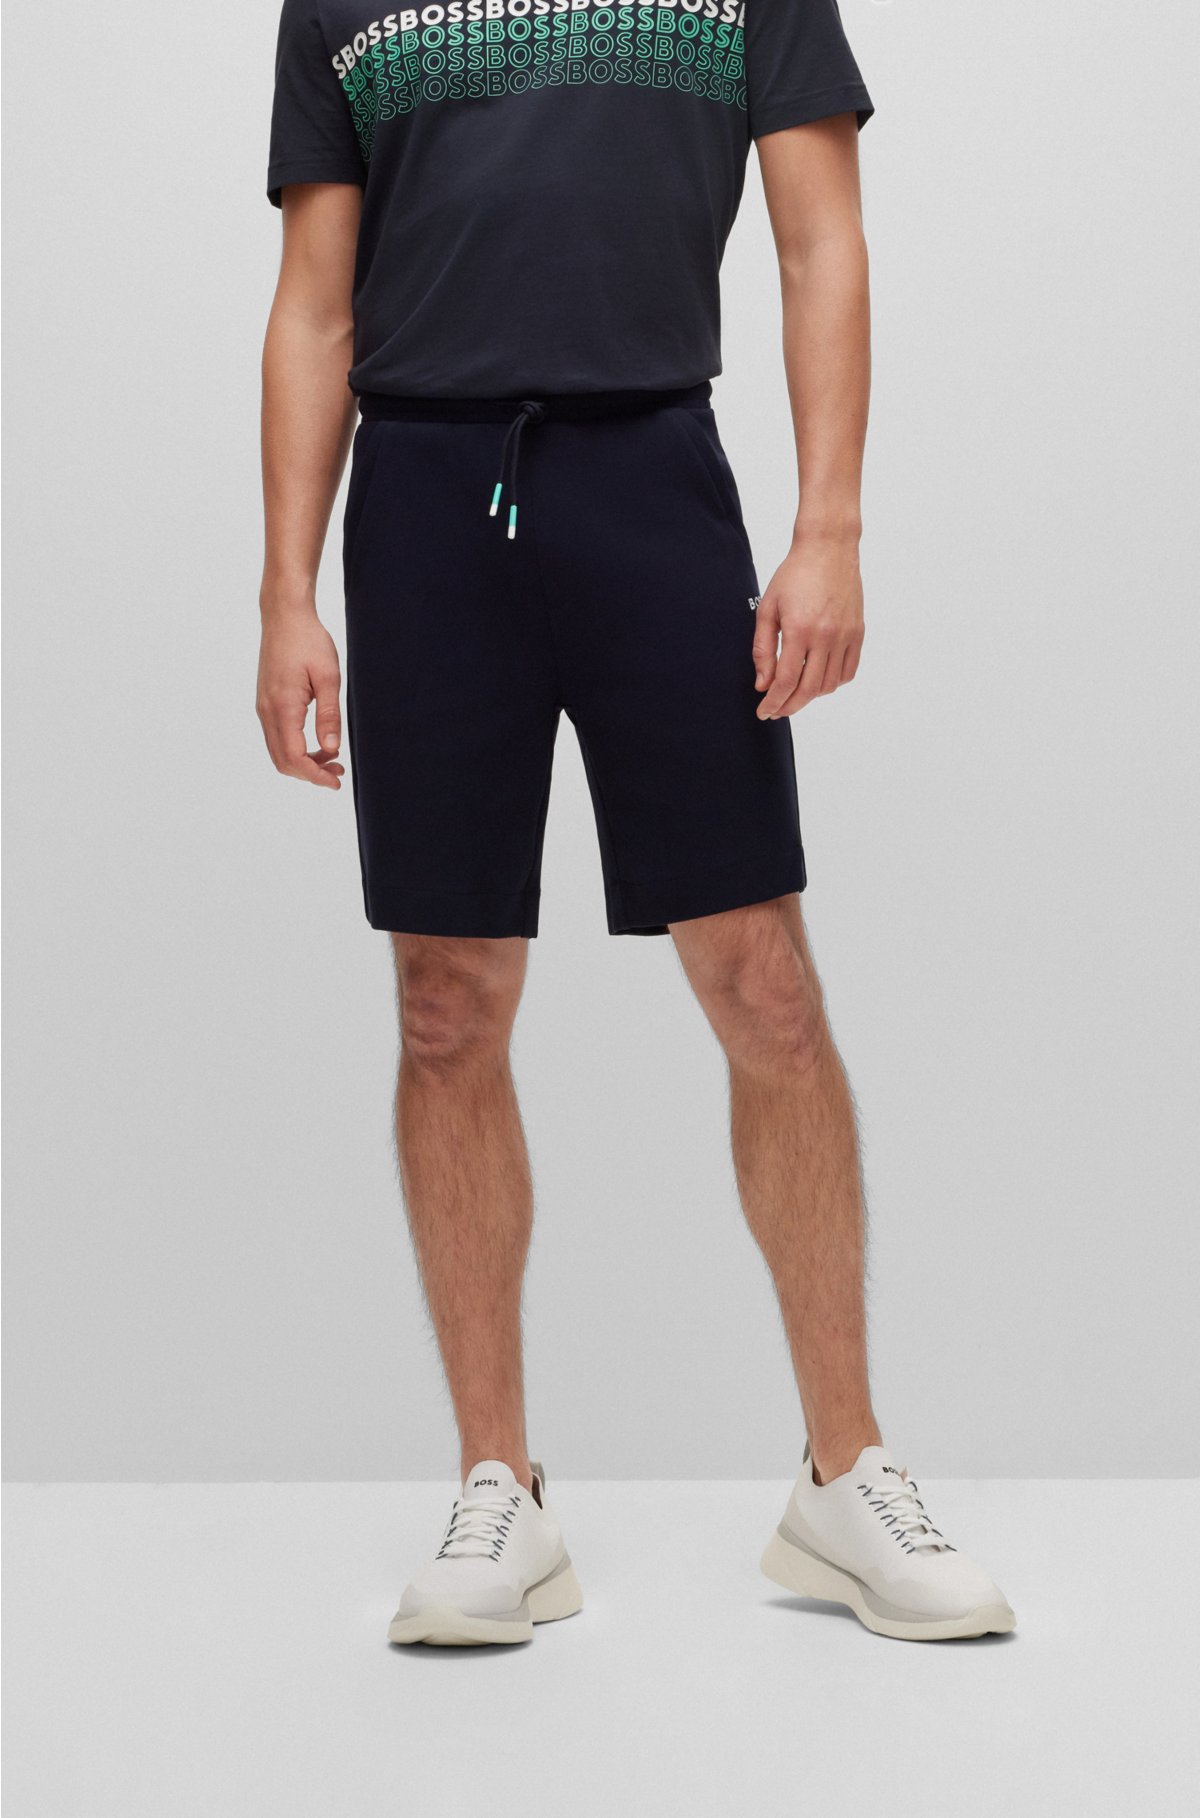 - with Regular-fit BOSS multi-coloured shorts logos